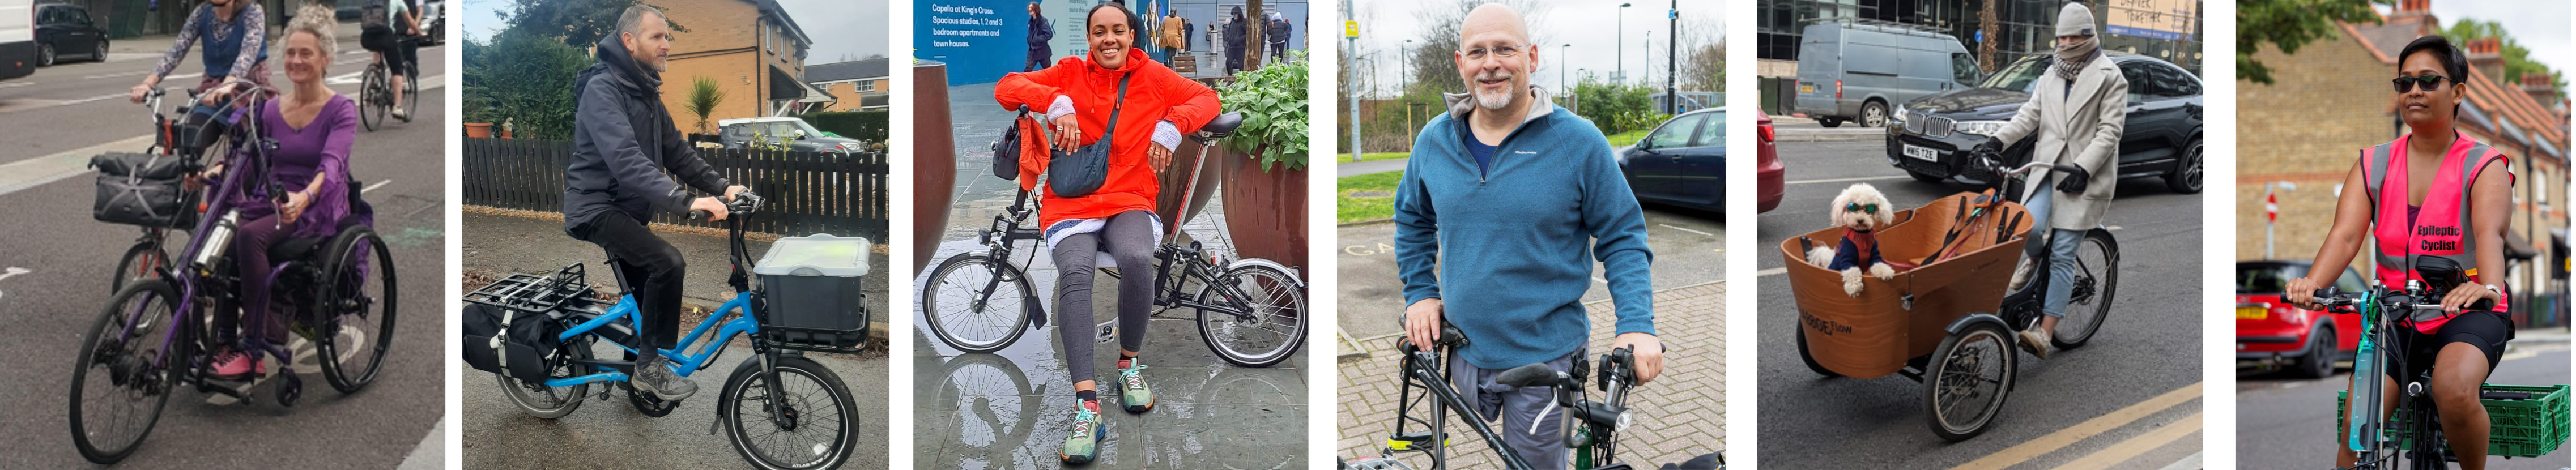 Photo strip of 6 Disabled cyclists from left to right; A white woman using a wheelchair with a clip-on handcyclist; a white man riding a longtail cargo cycle with a crate on the front; a black woman sitting sideways on a folding bike; a white man with one leg standing holding a bike which has crutches clipped between the handlebars and seatpost; a person wrapped up in winter clothes riding a cargo trike which has a small white dog wearing a coat and sunglasses in the cargo container; a brown woman riding a cycle wearing a high-vis vest which has the words "epileptic cyclist" on it.